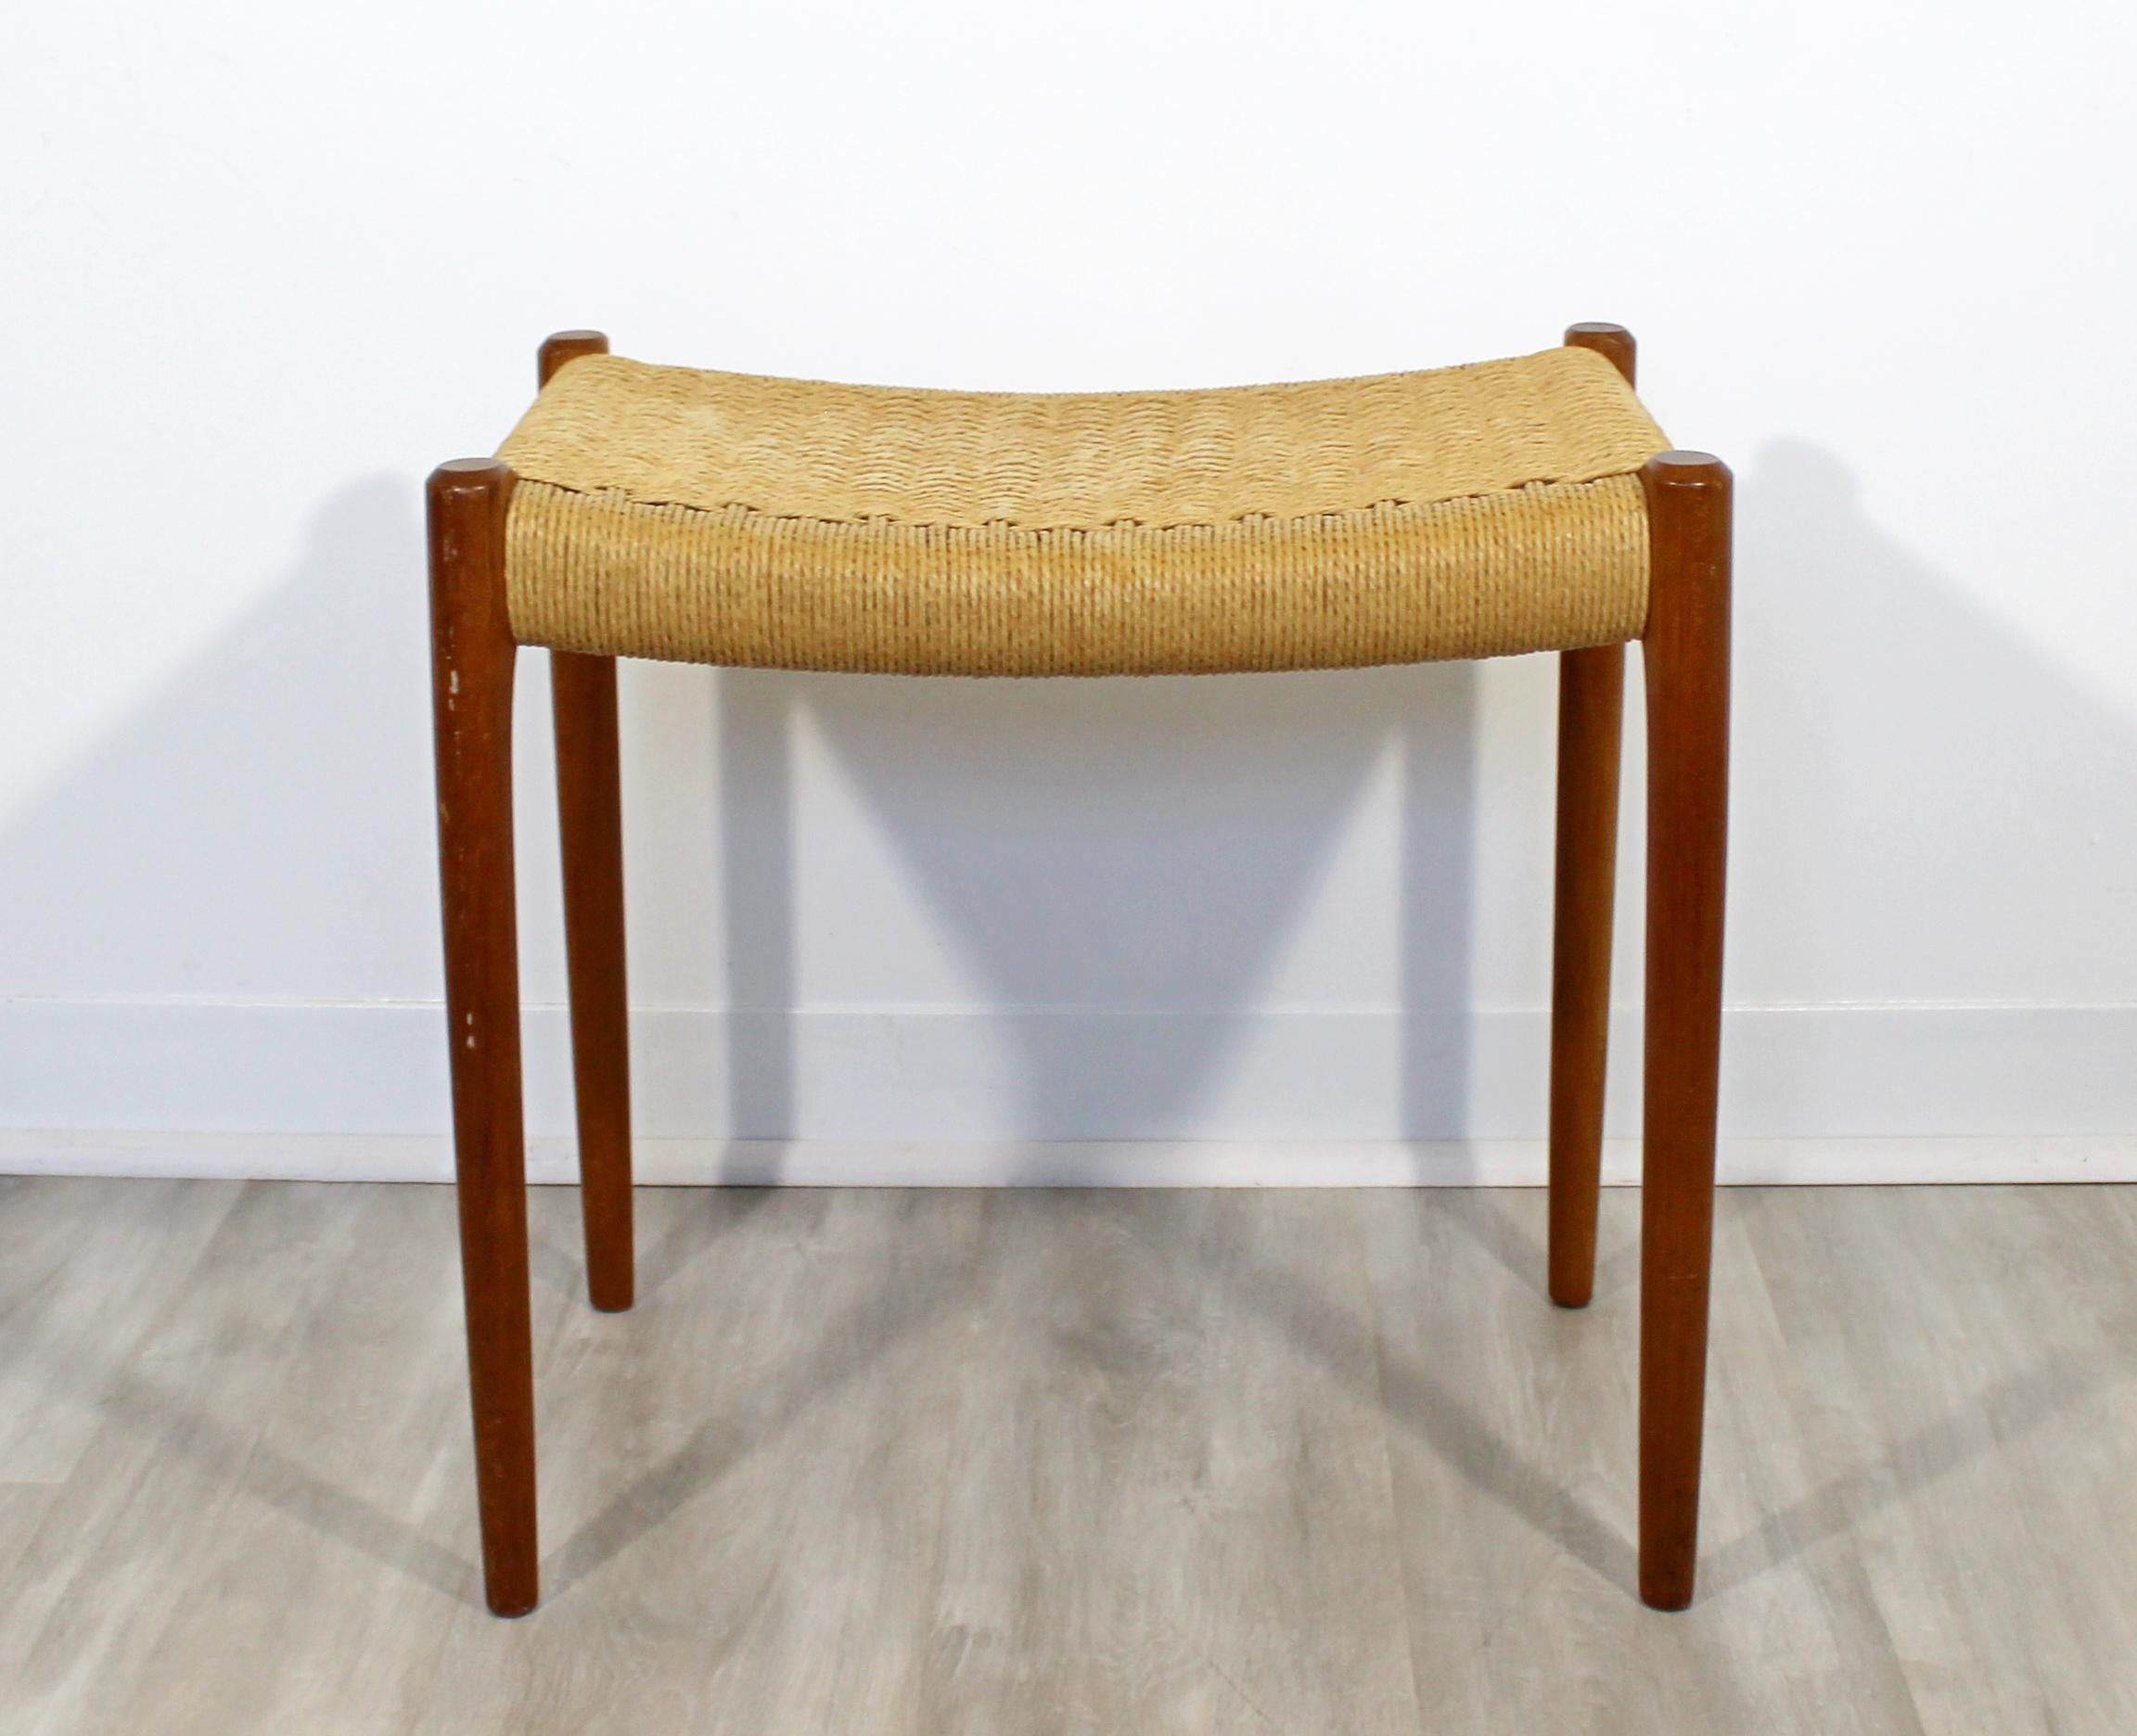 For your consideration is a gorgeous bench seat, made of teak and with a cord seat, by Niels Moller, made in Denmark, circa 1960s. In great vintage condition. The dimensions are 19.5